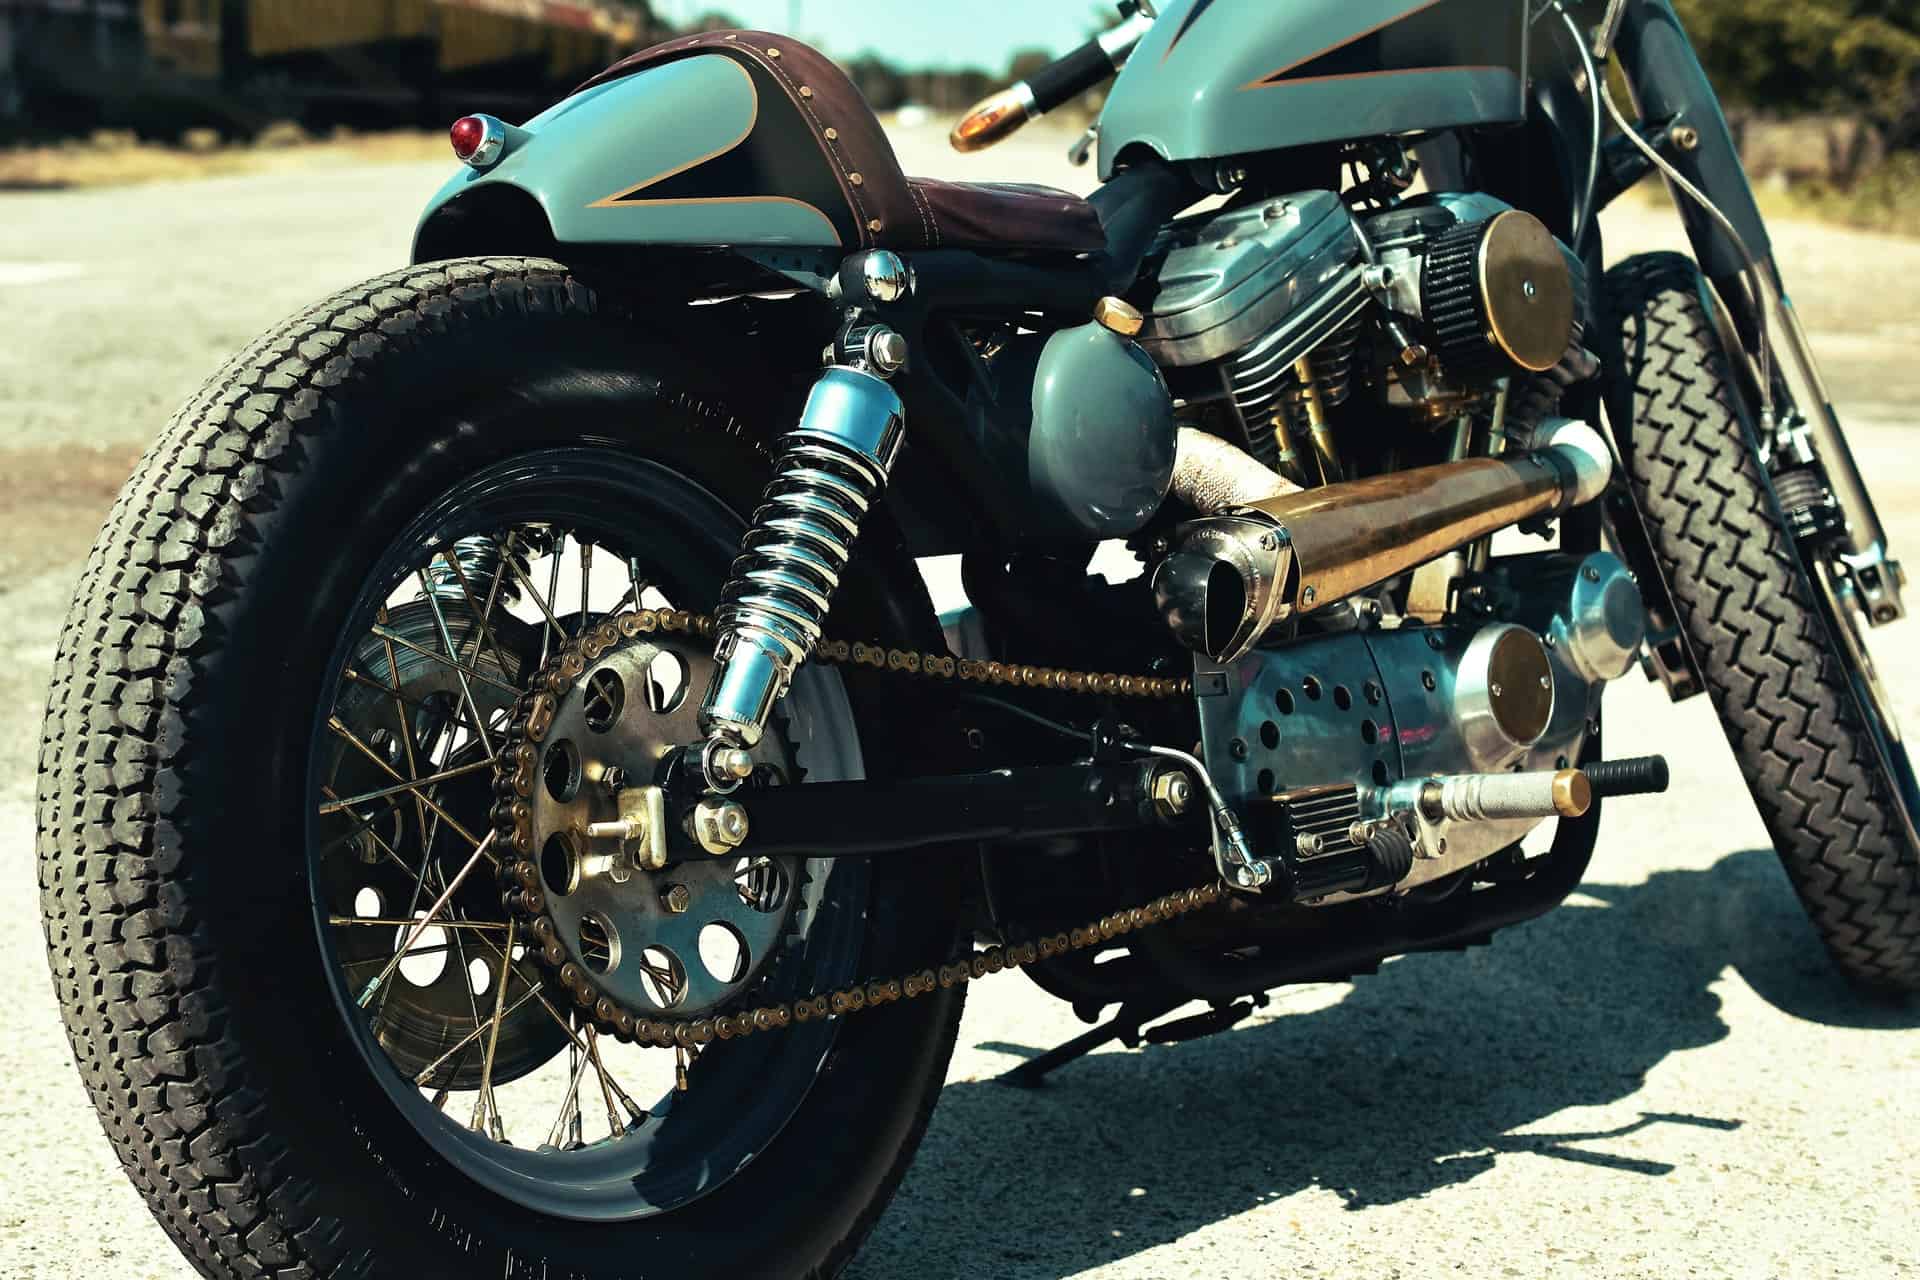 How to maintain a motorcycle chain before the season?